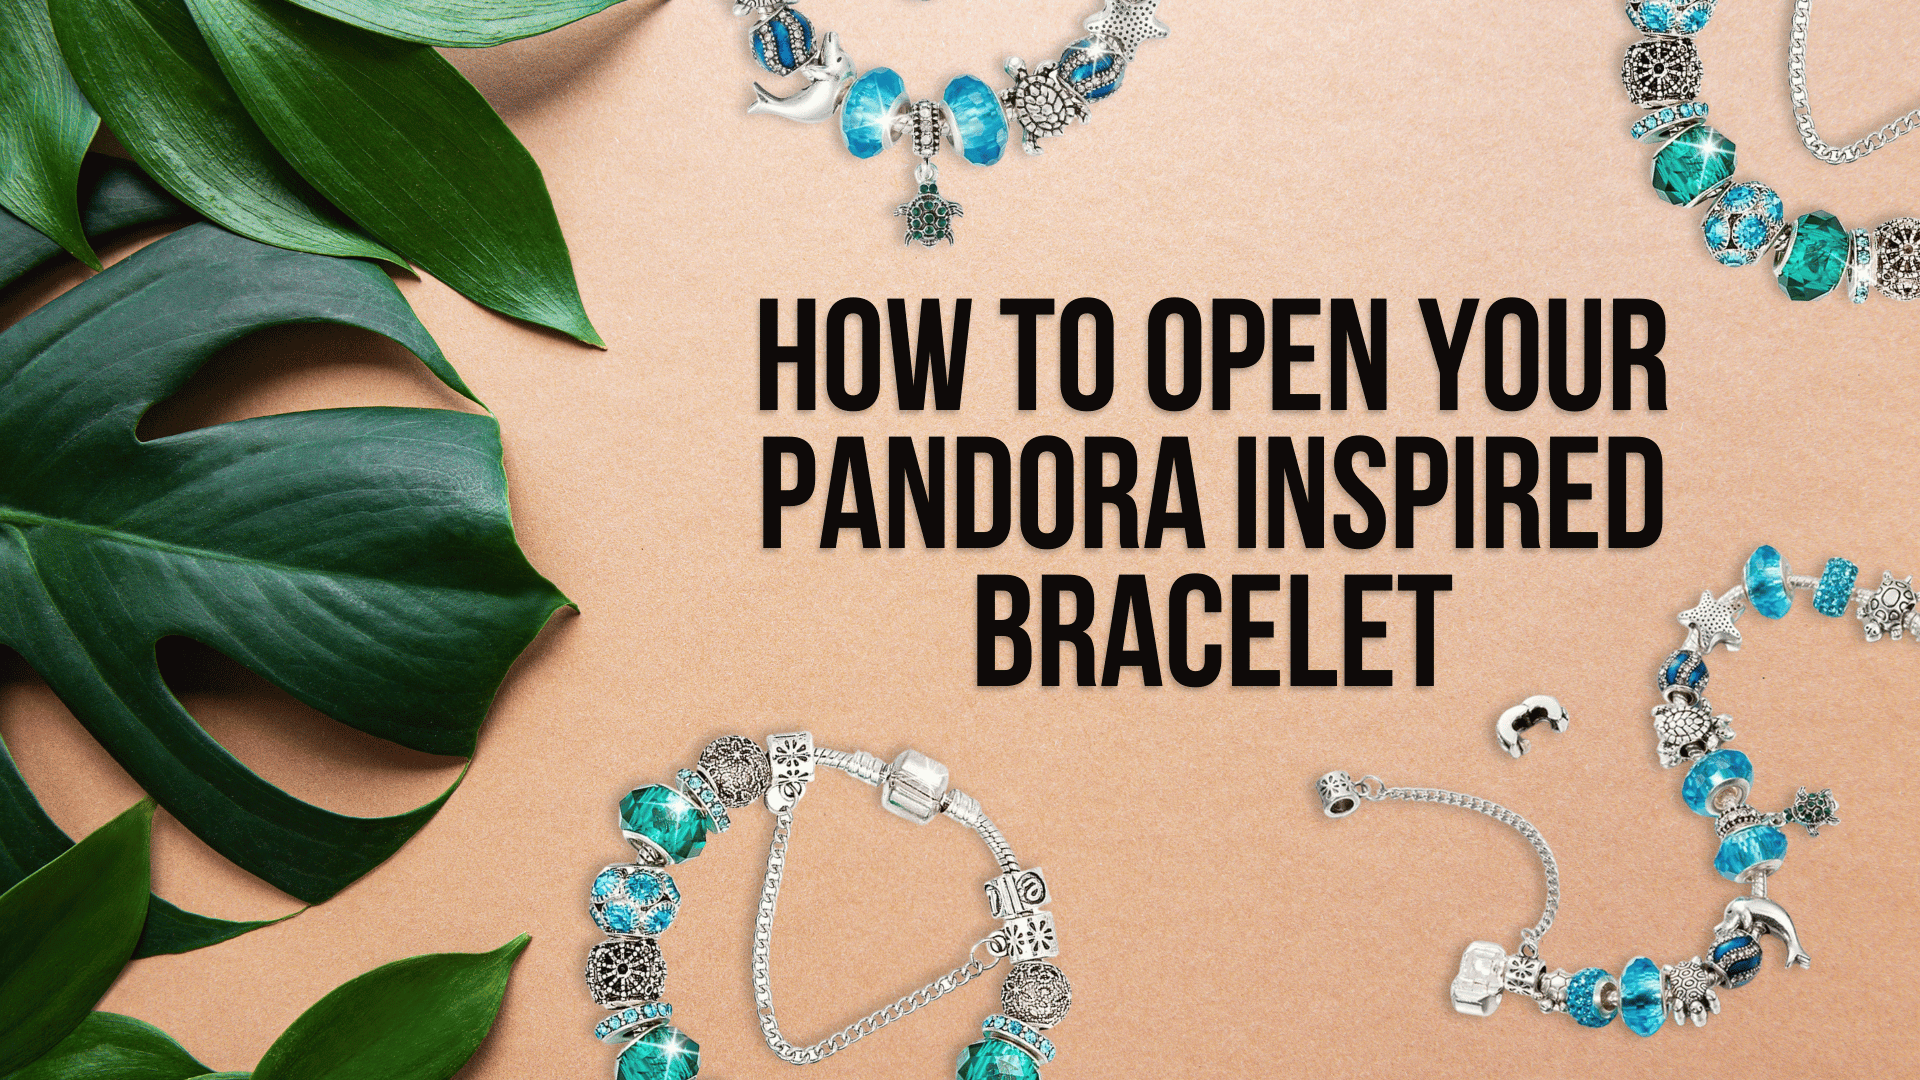 A Step-by-Step Guide to Opening Your Pandora-Inspired Bracelet